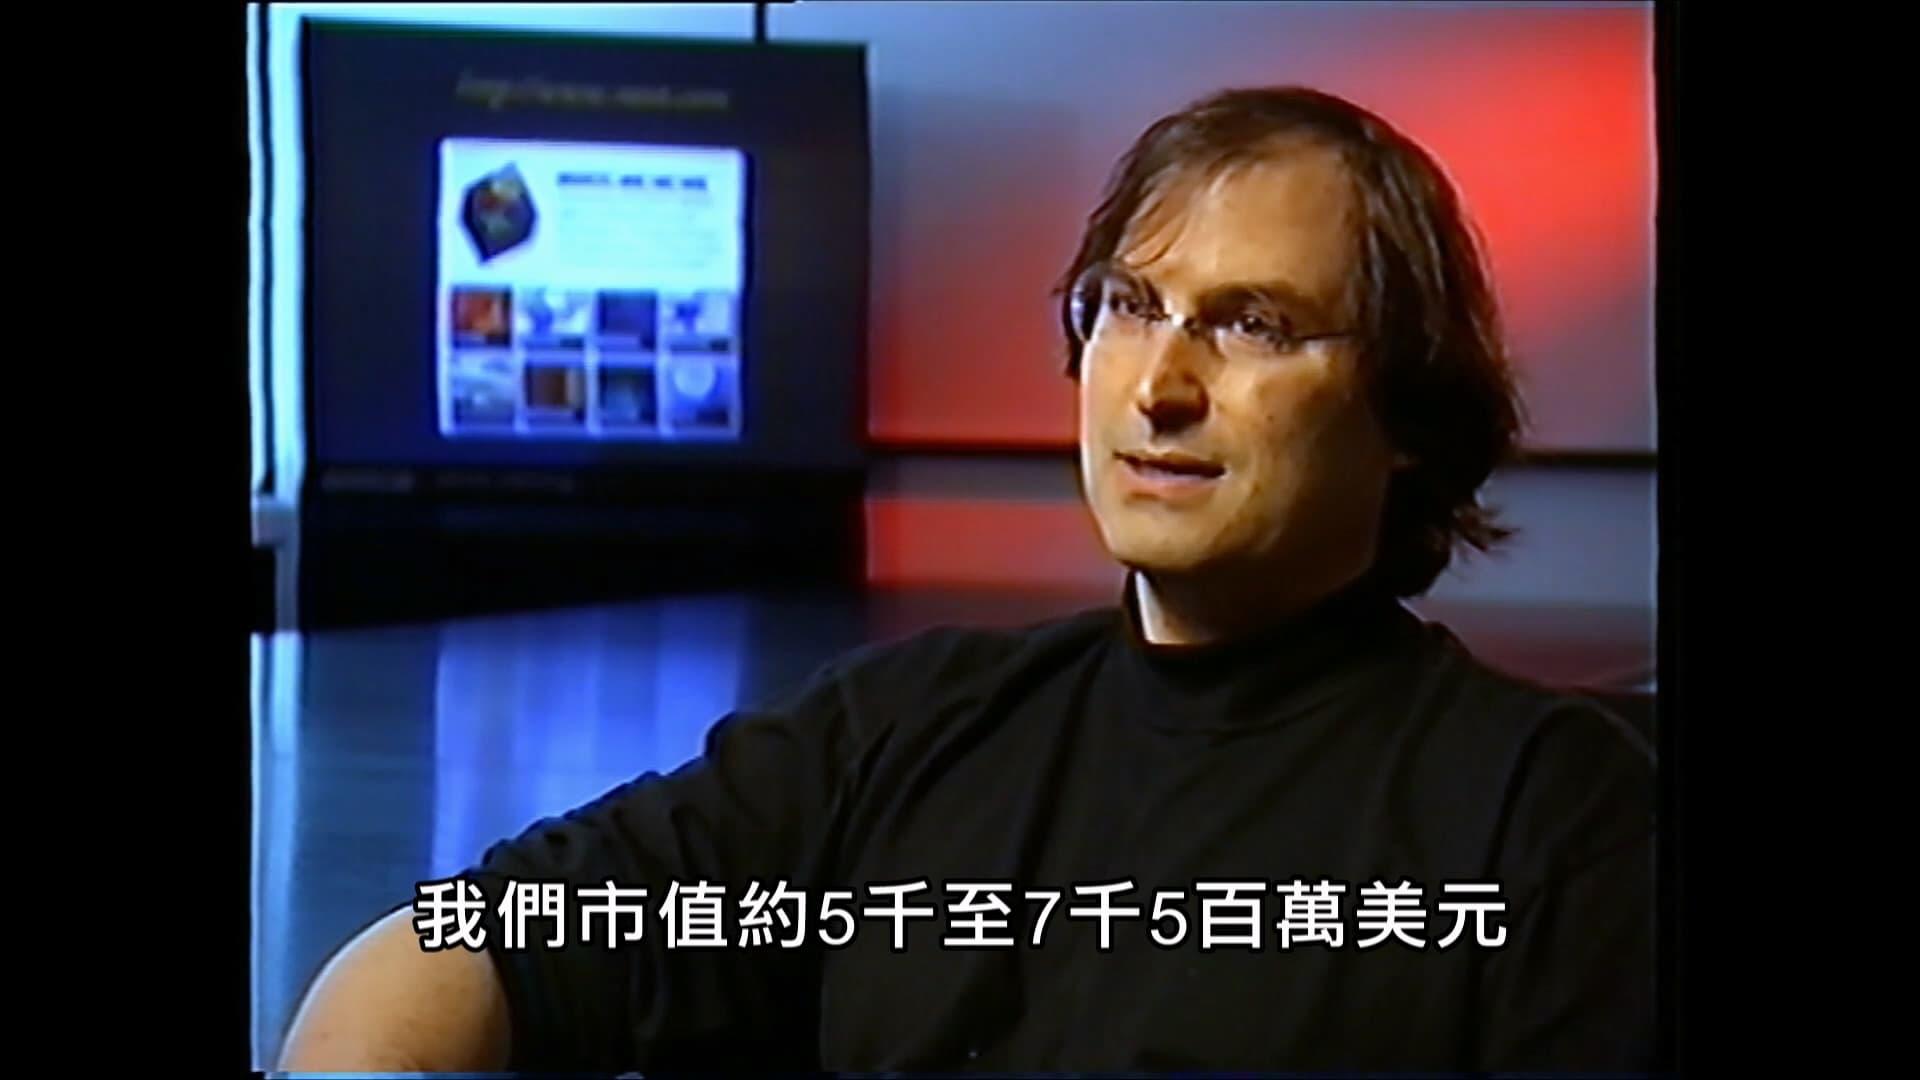 Steve Jobs: The Lost Interview backdrop